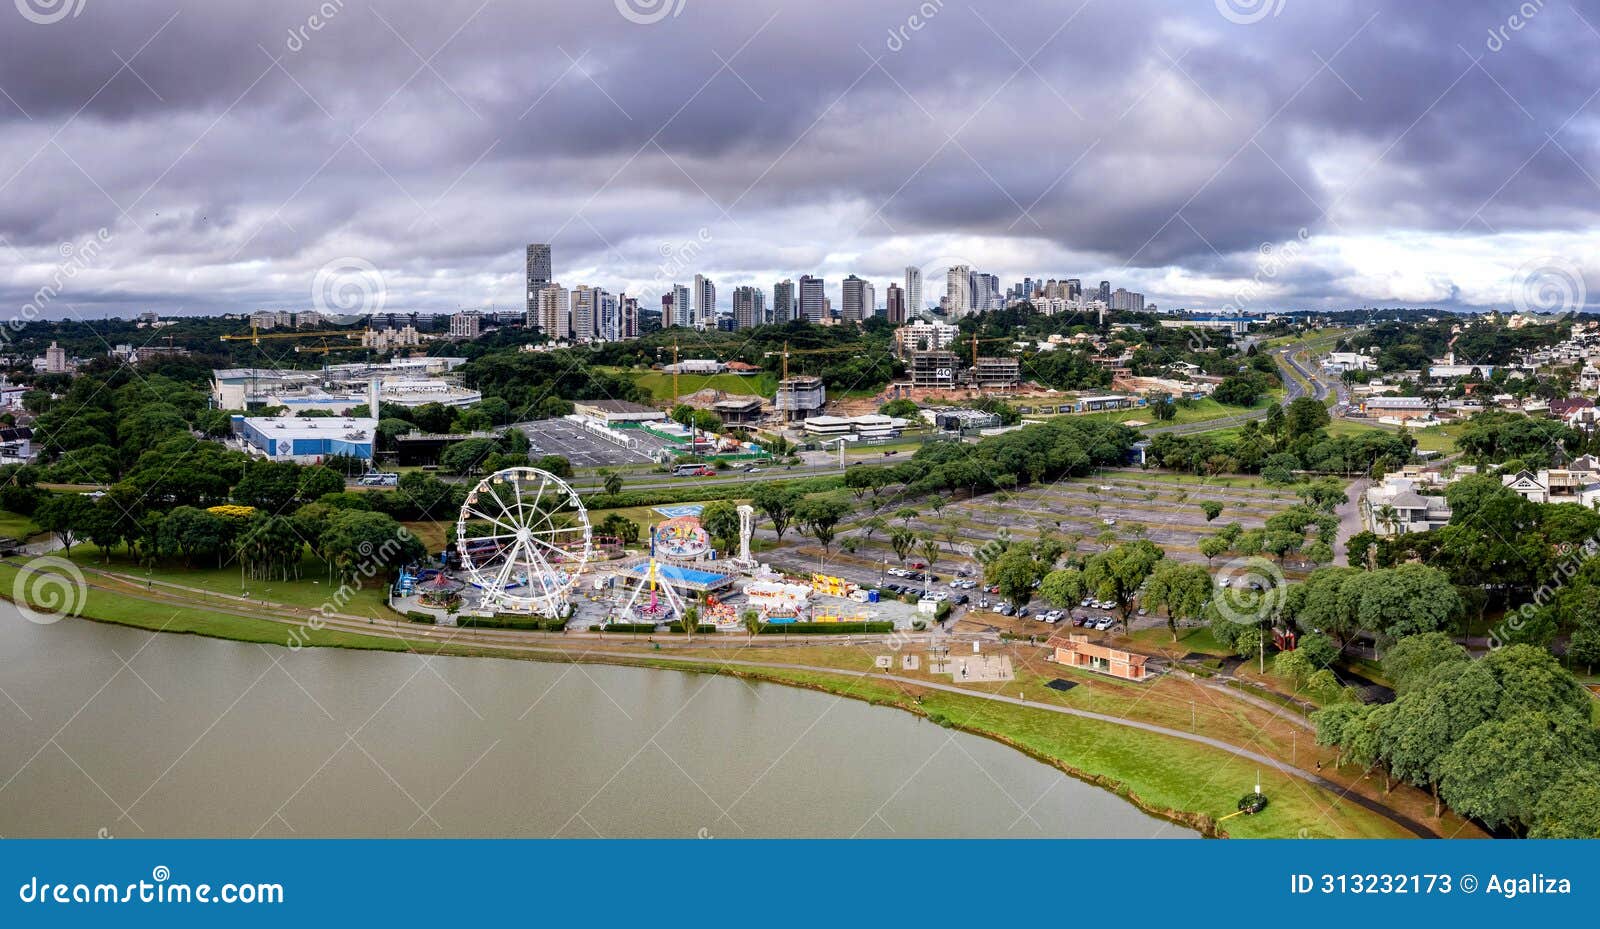 aerial view of beautiful and green parque barigui in curitiba, brazil